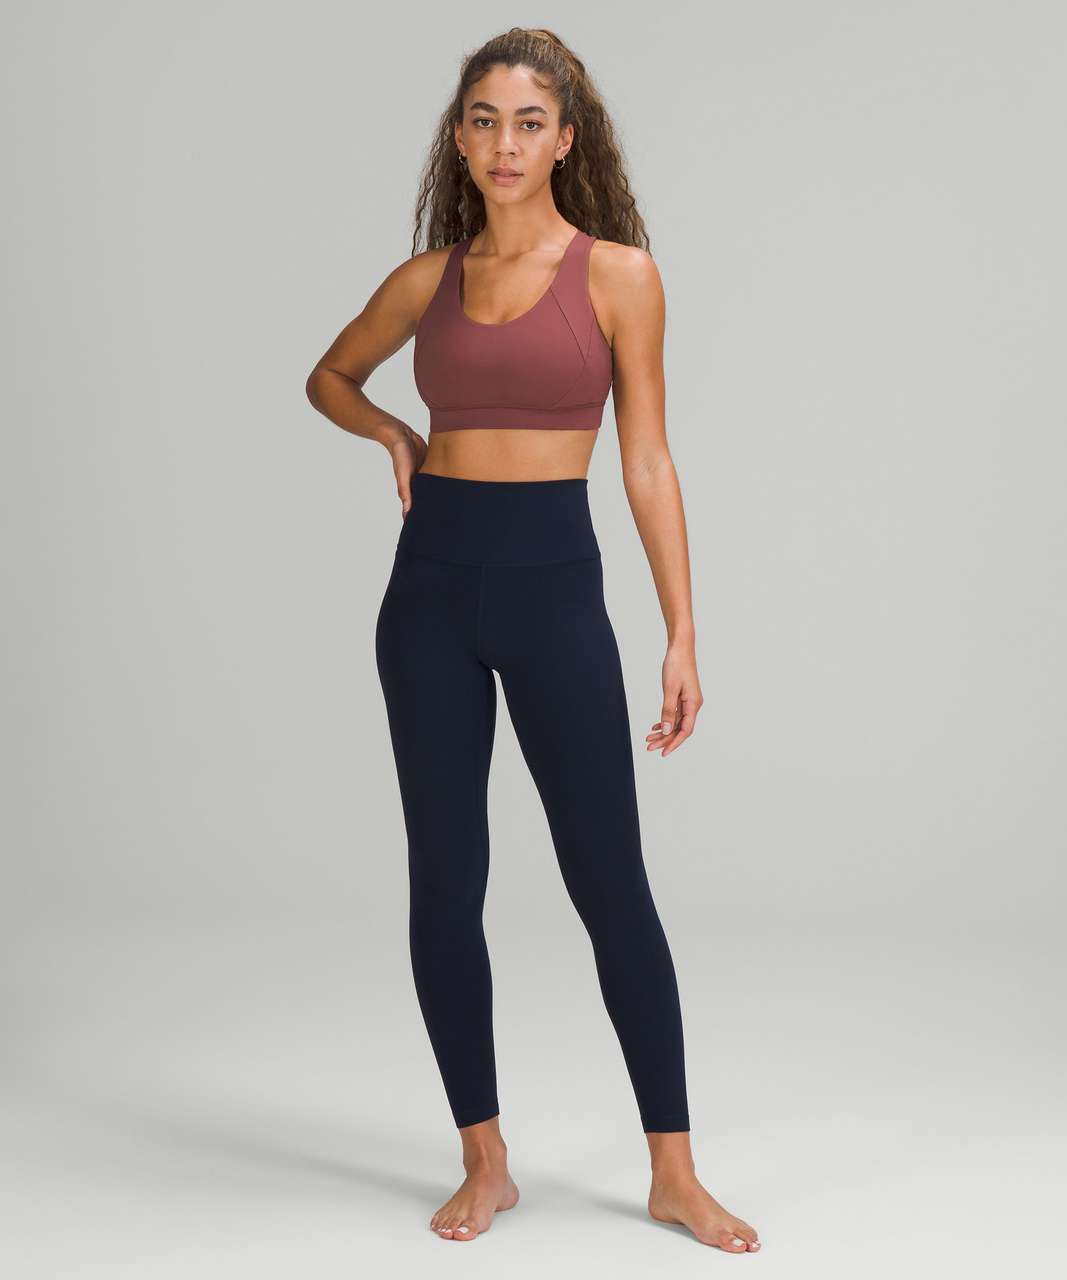 Special Edition LNY Flow Y Bra in Smoky Red spotted in-stores in the US!  Fingers crossed we get those scubas soon too! : r/lululemon